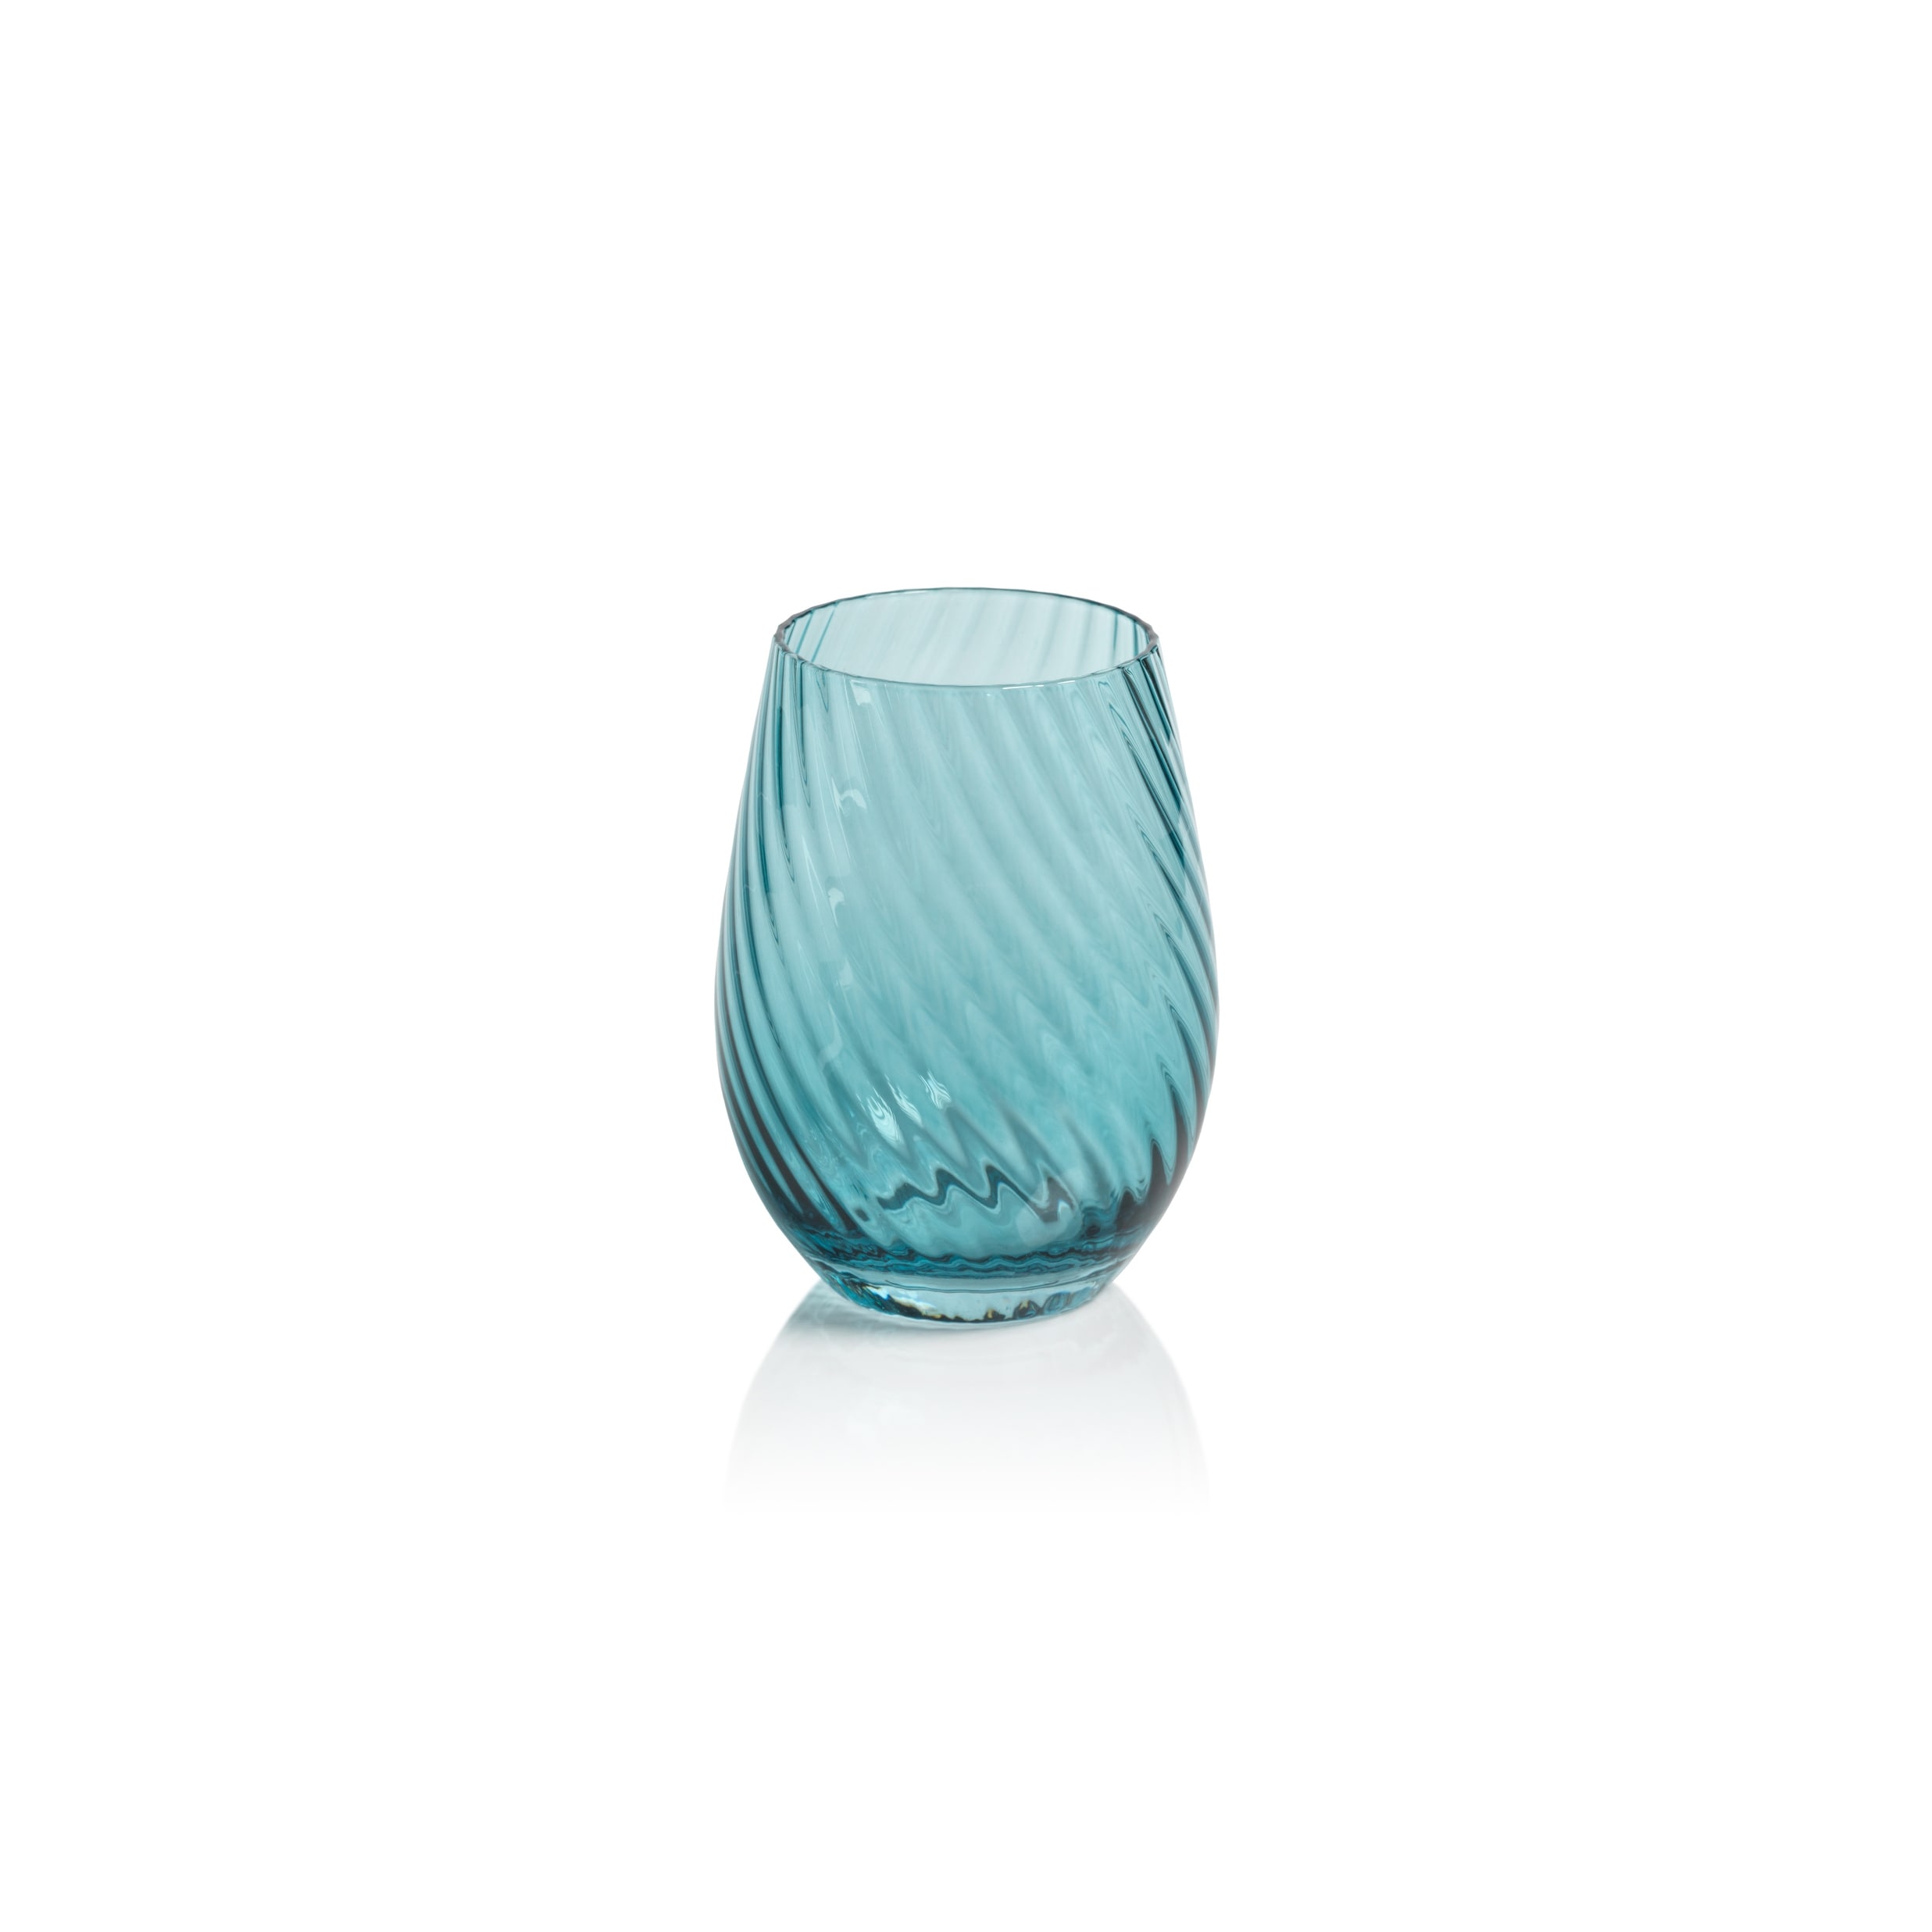 https://ak1.ostkcdn.com/images/products/is/images/direct/d53919314136b94835424255e08bfe22ddc867ce/Sesto-Optic-Swirl-Stemless-Glasses%2C-Set-of-4.jpg